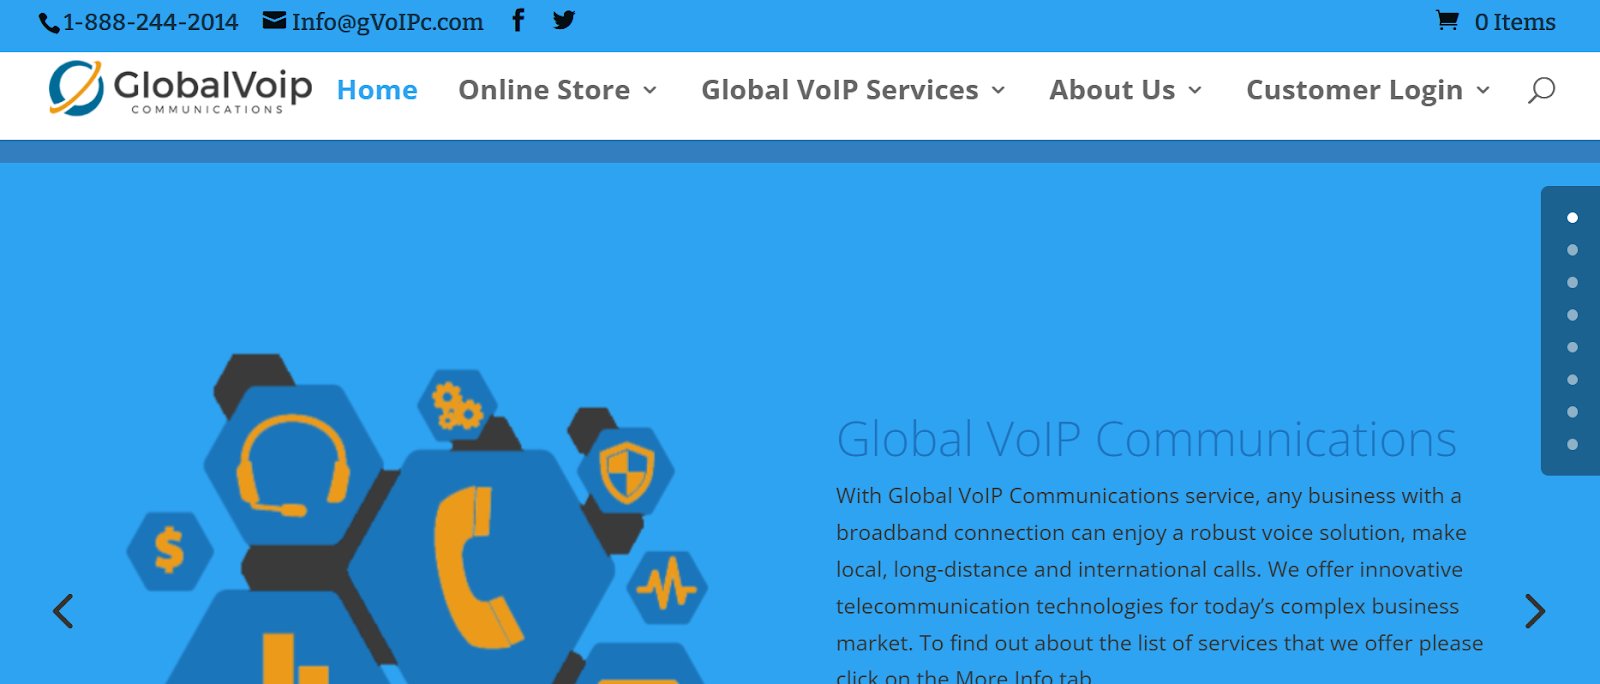 GlobalVoIP website snapshot highlighting the services it offers.